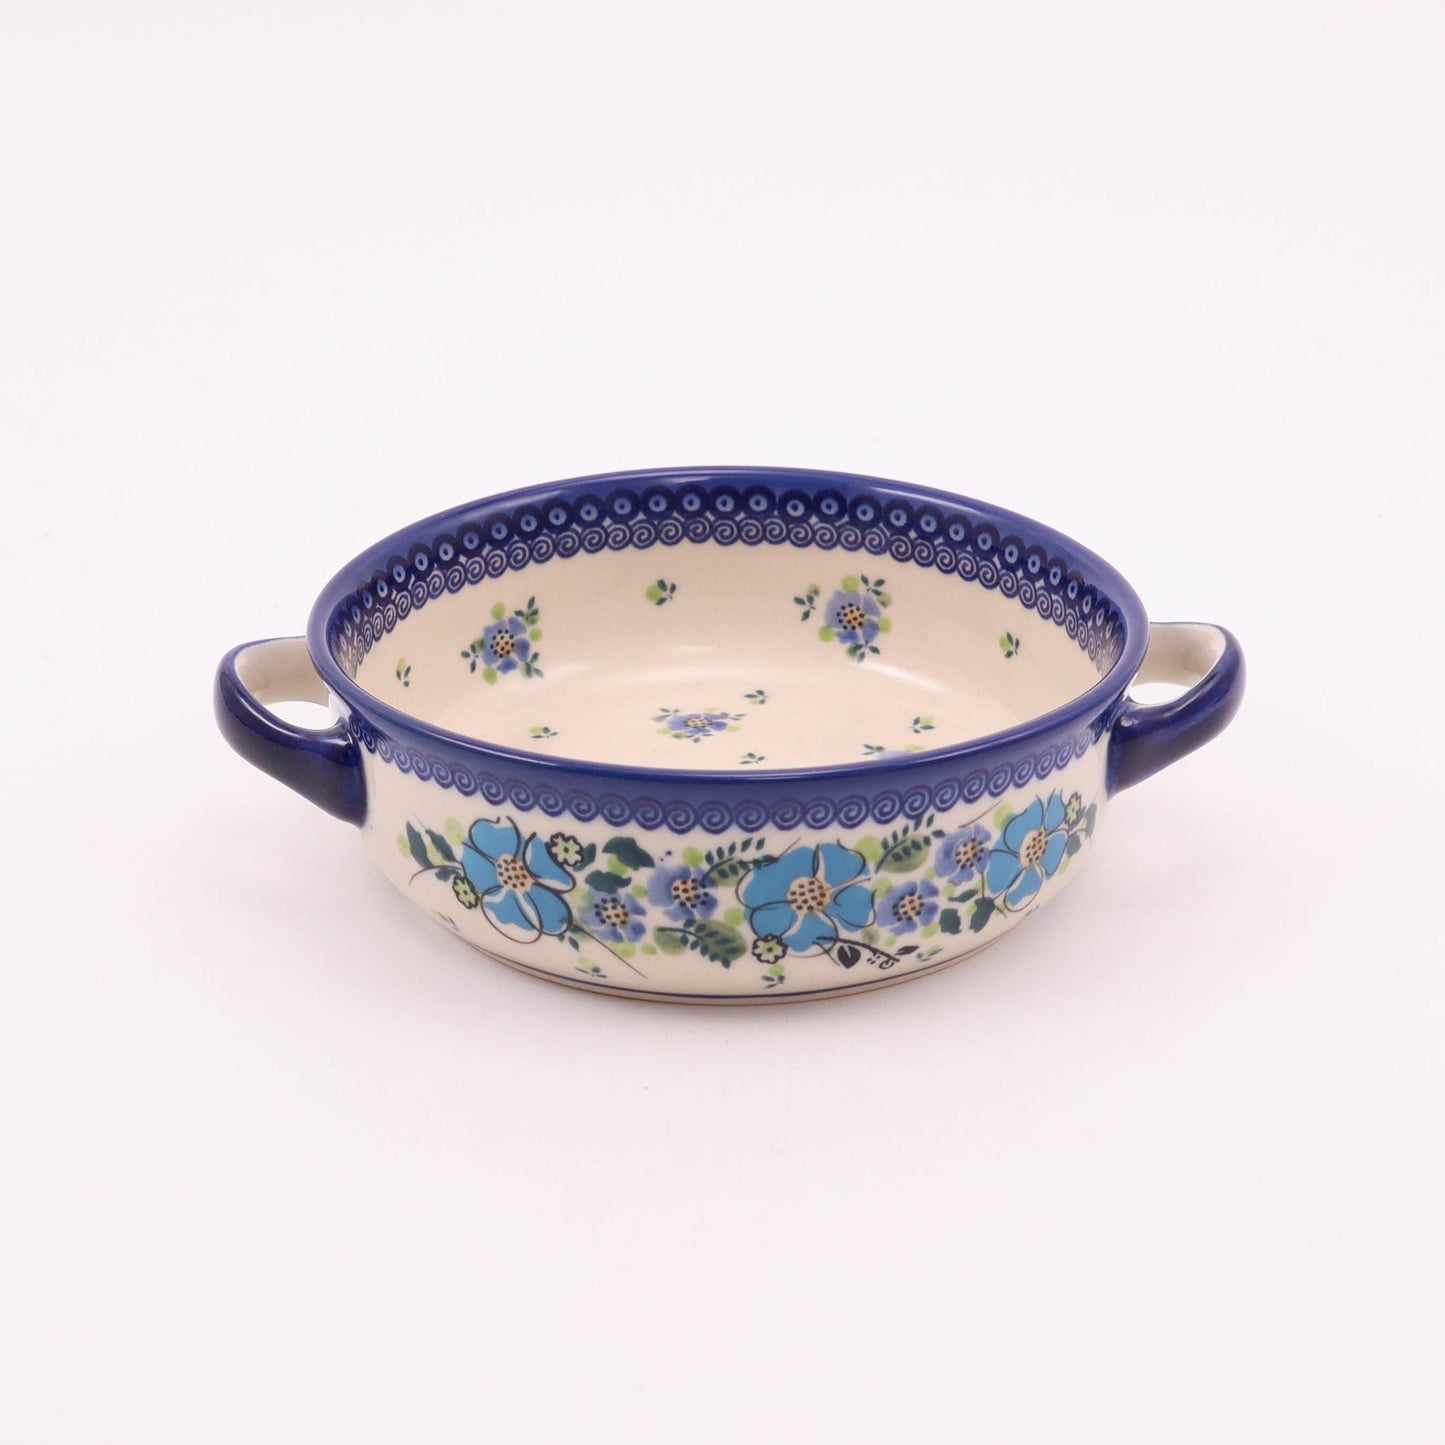 6"x2" Small Round Baker with Handles. Pattern: Periwinkle Wreath